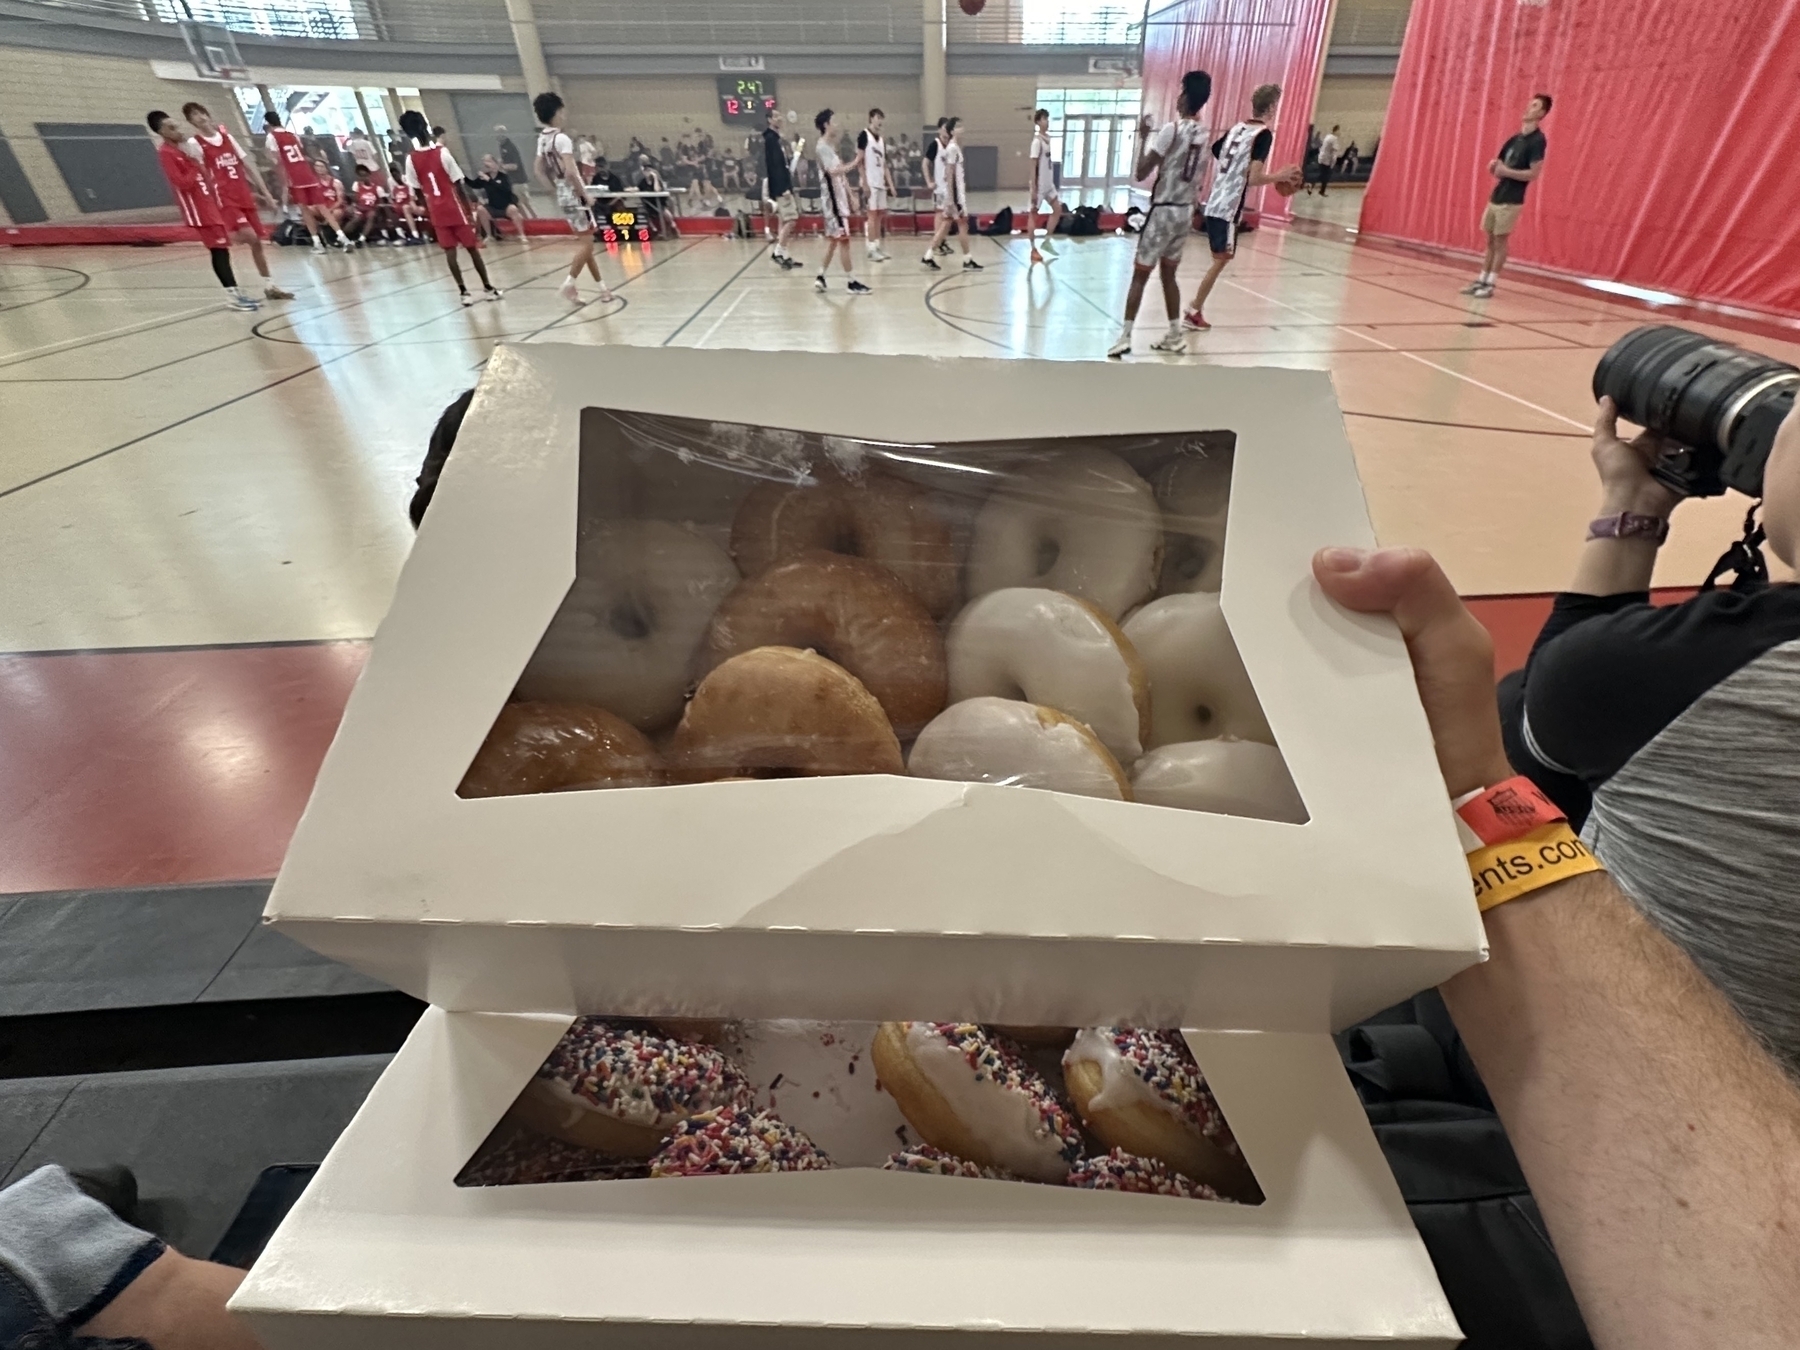 Two boxes of assorted donuts are held by a person in a gym where a basketball game is occurring between teams in red and white uniforms.